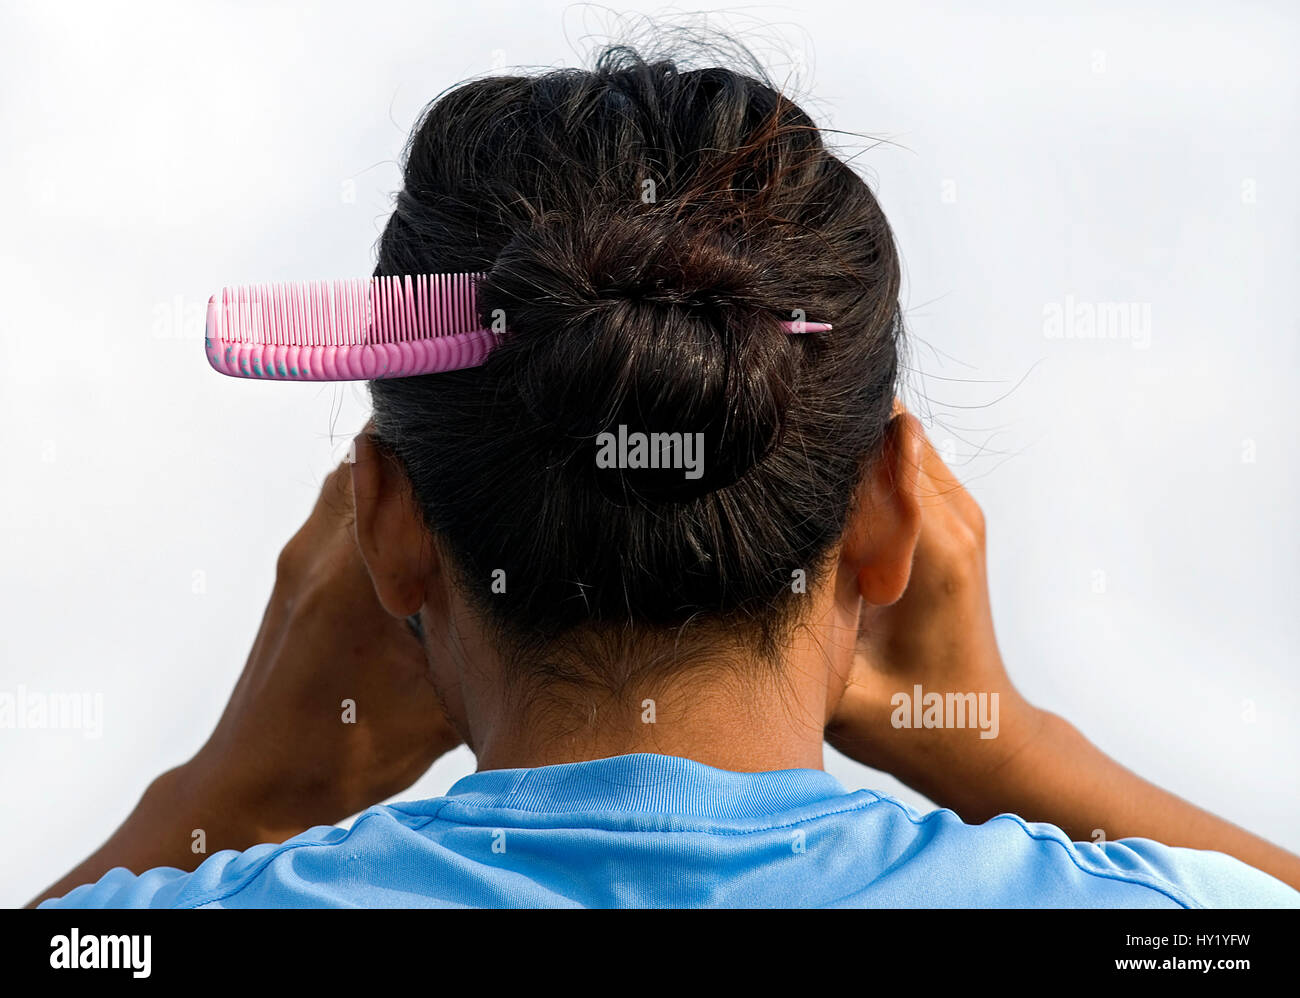 This stock photo shows a Thai Ladyboyand his hair from behind, looking through binoculars. The image was taken on a sunny afternoon. Stock Photo